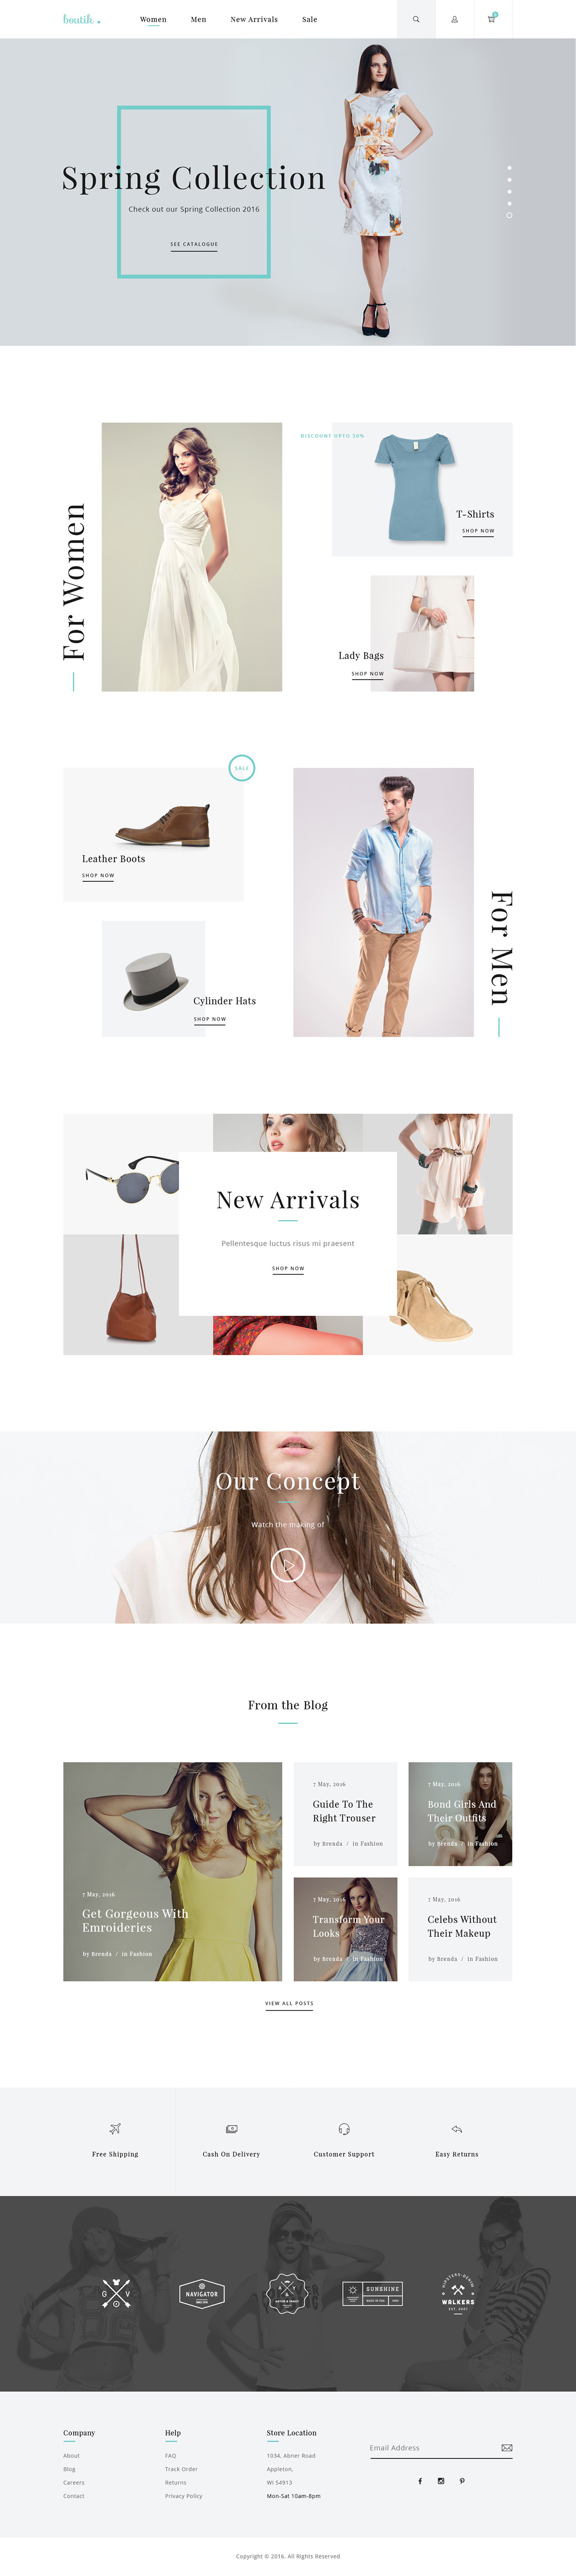 psd template UI minimal clean design ux Ecommerce online store Web Theme professional personal Blog